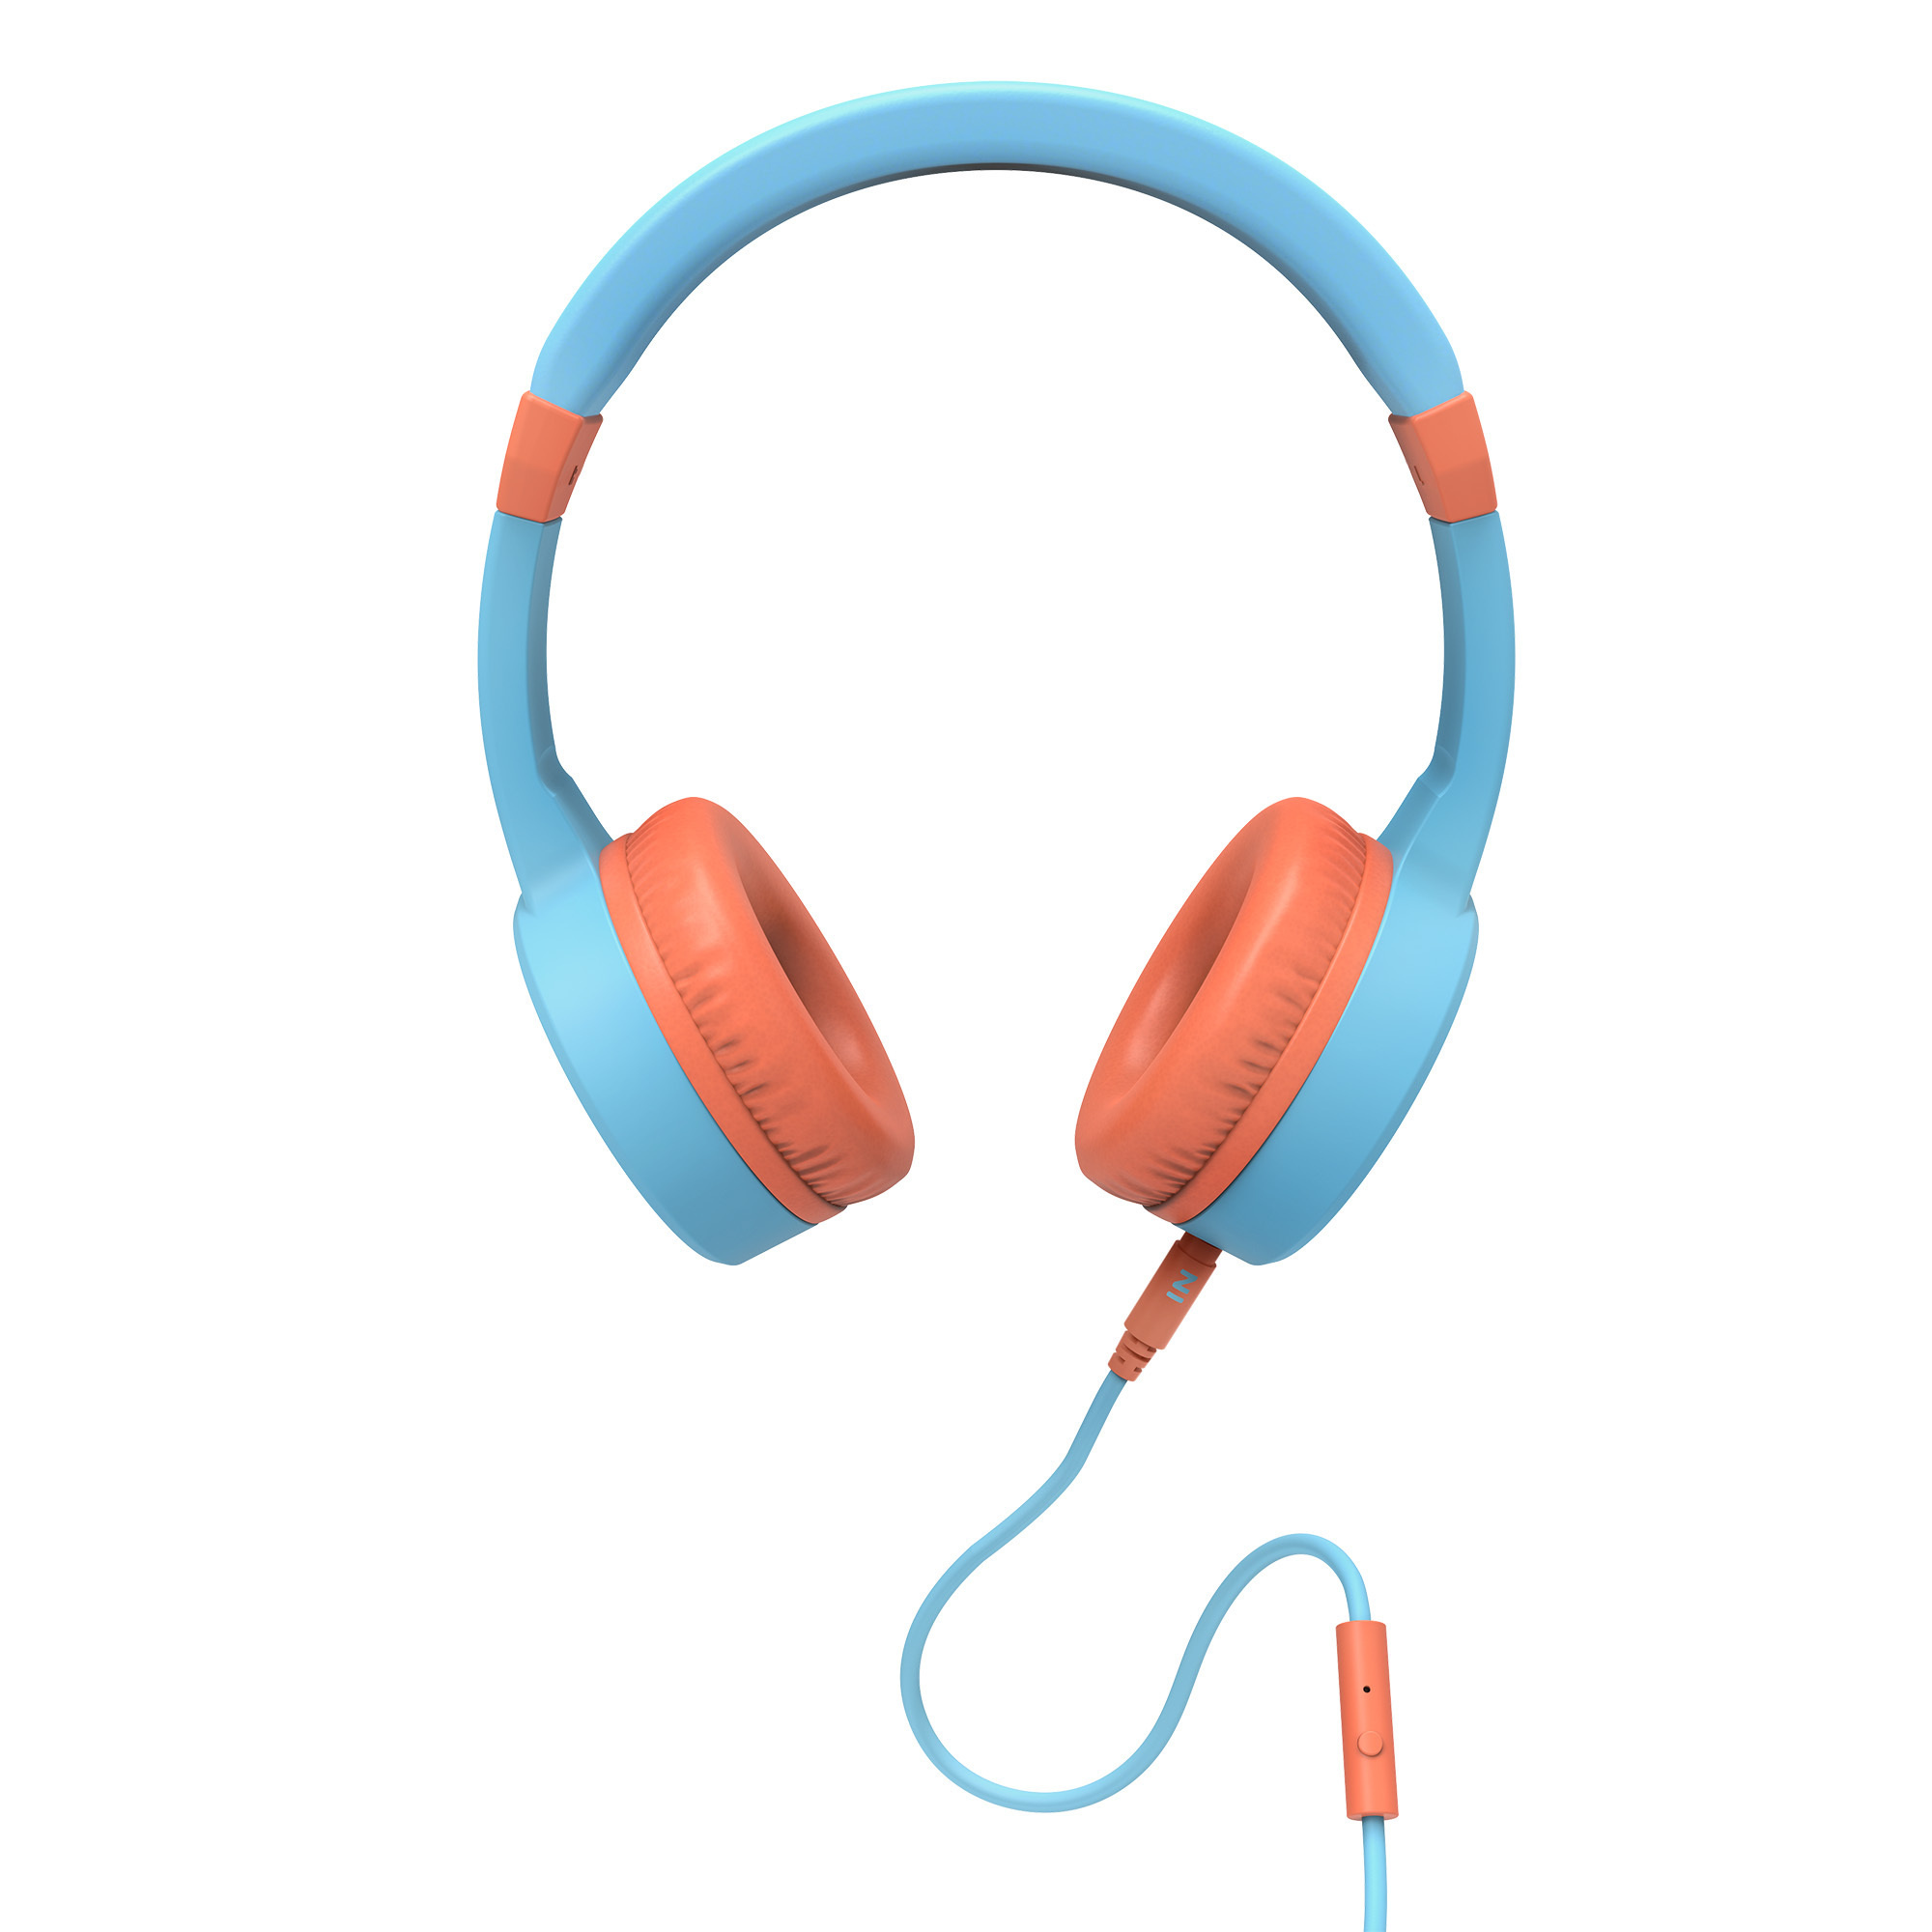 Kids headset with Music Share to connect 2 sets of headphones